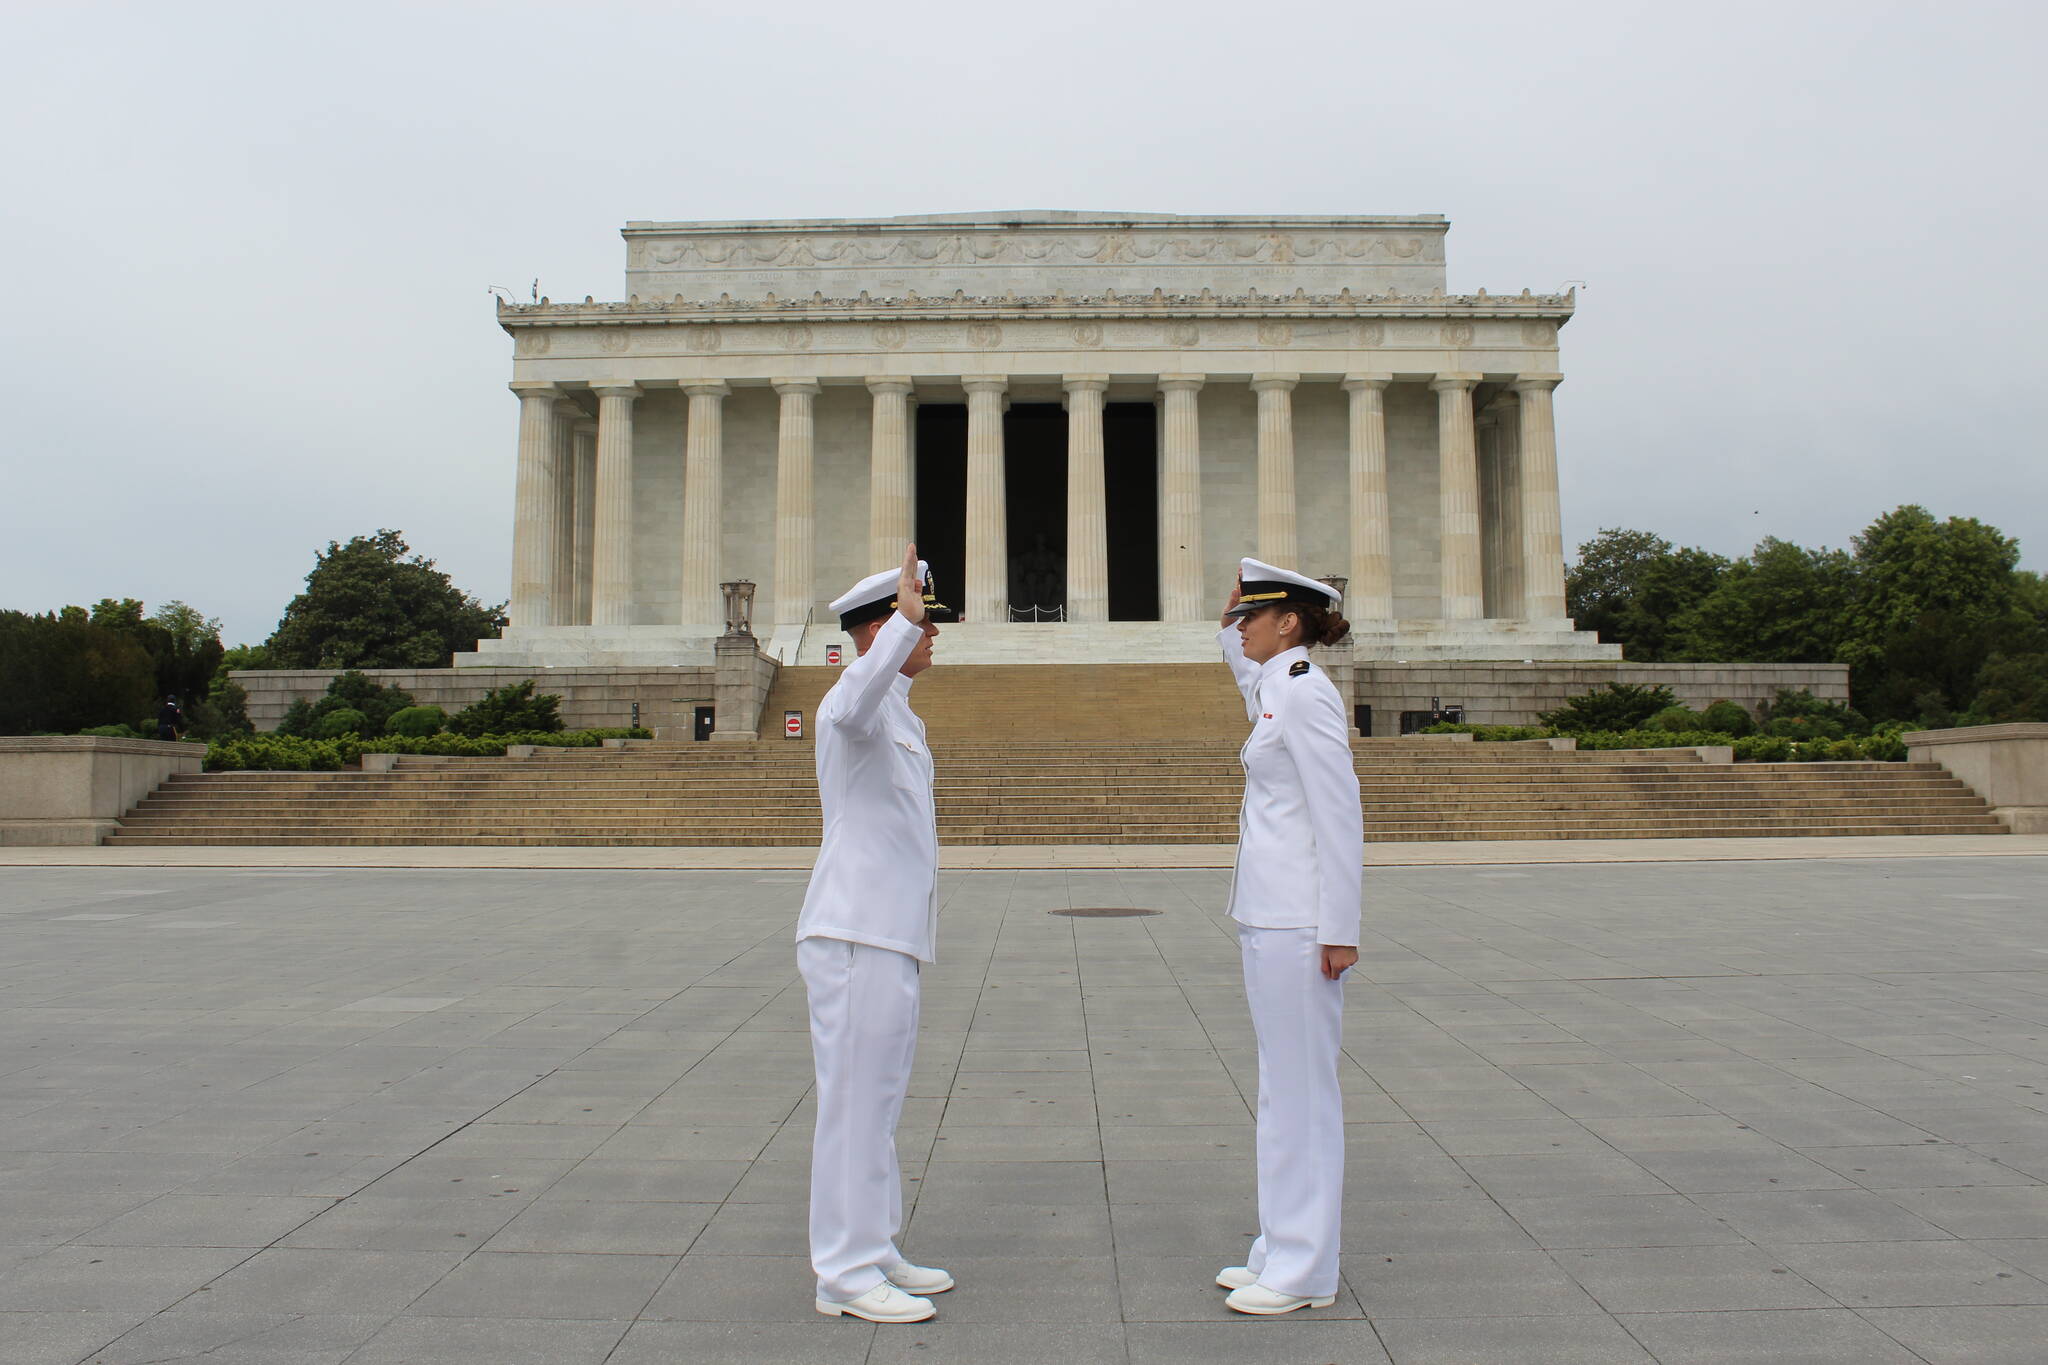 Capt. Randolph Pierson, left, giving Alyssa Pierson the Oath of Office for Alyssa Pierson’s Commissioning at the Lincoln Memorial in Washington DC. in 2020. (Photo provided)